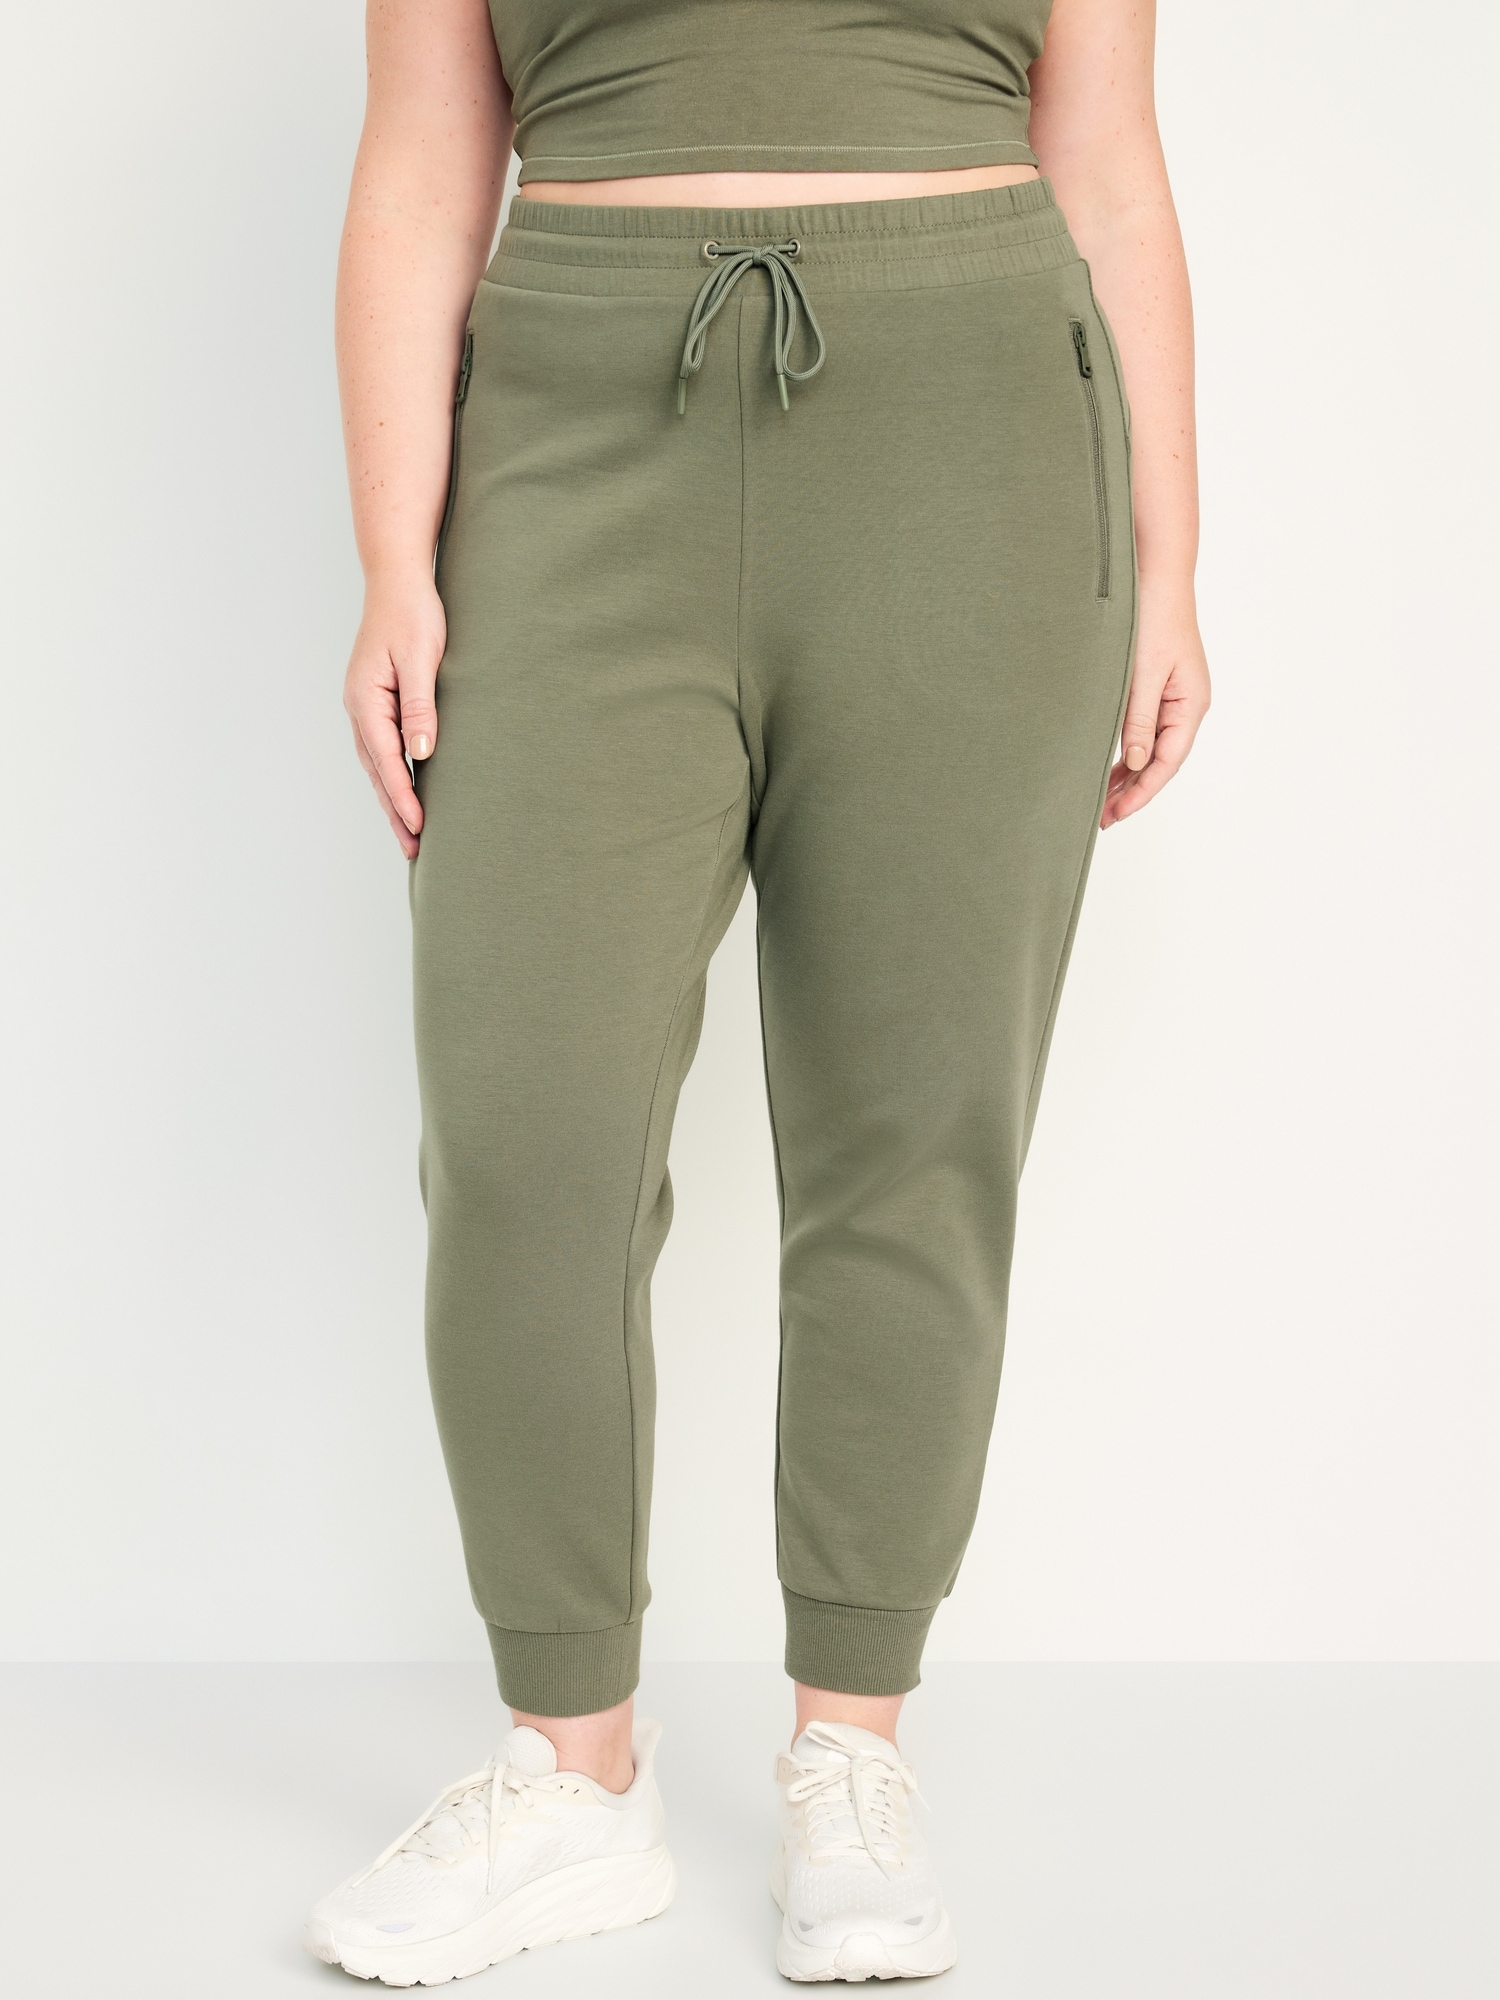 Old Navy Slim High-Waisted Dynamic Fleece Joggers for Girls